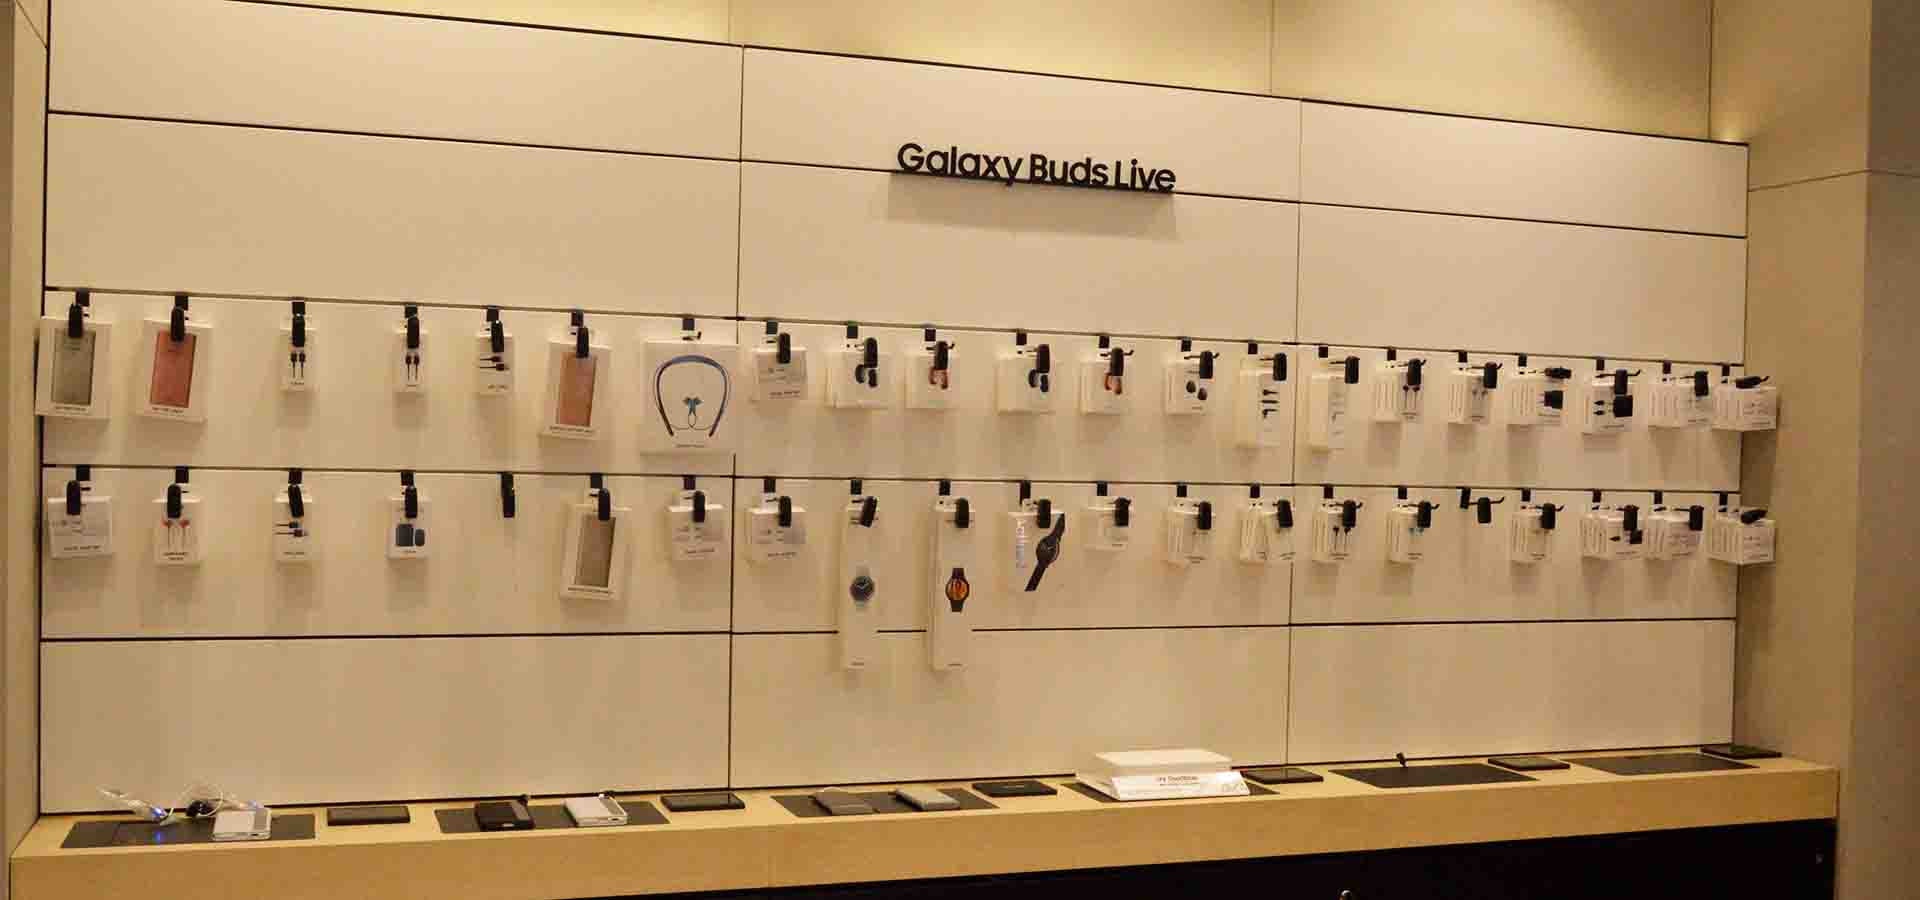 Samsung store photos in mall